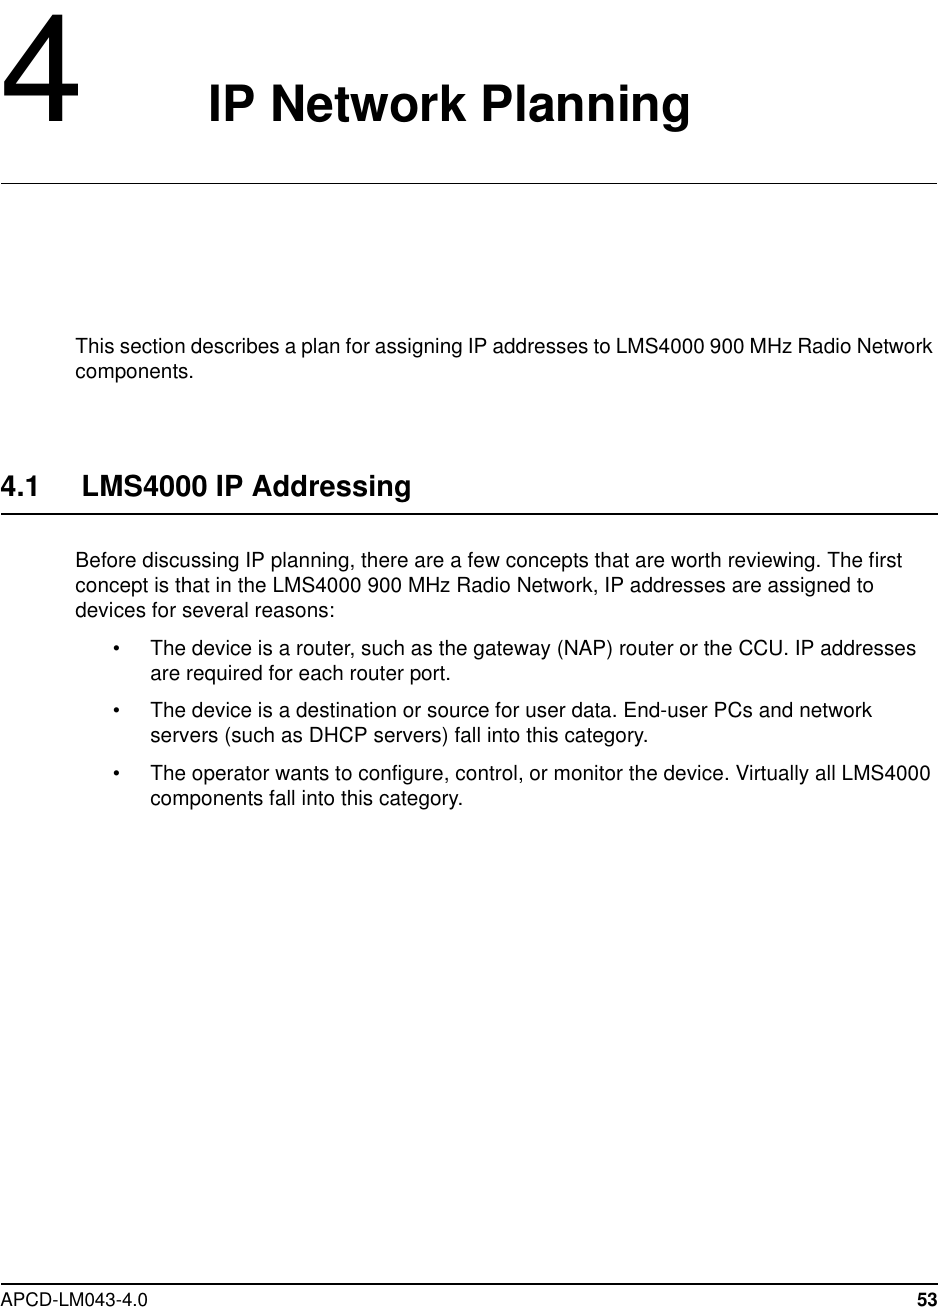 APCD-LM043-4.0 534IP Network PlanningThis section describes a plan for assigning IP addresses to LMS4000 900 MHz Radio Networkcomponents.4.1 LMS4000 IP AddressingBefore discussing IP planning, there are a few concepts that are worth reviewing. The firstconcept is that in the LMS4000 900 MHz Radio Network, IP addresses are assigned todevices for several reasons:• The device is a router, such as the gateway (NAP) router or the CCU. IP addressesare required for each router port.• The device is a destination or source for user data. End-user PCs and networkservers (such as DHCP servers) fall into this category.• The operator wants to configure, control, or monitor the device. Virtually all LMS4000components fall into this category.